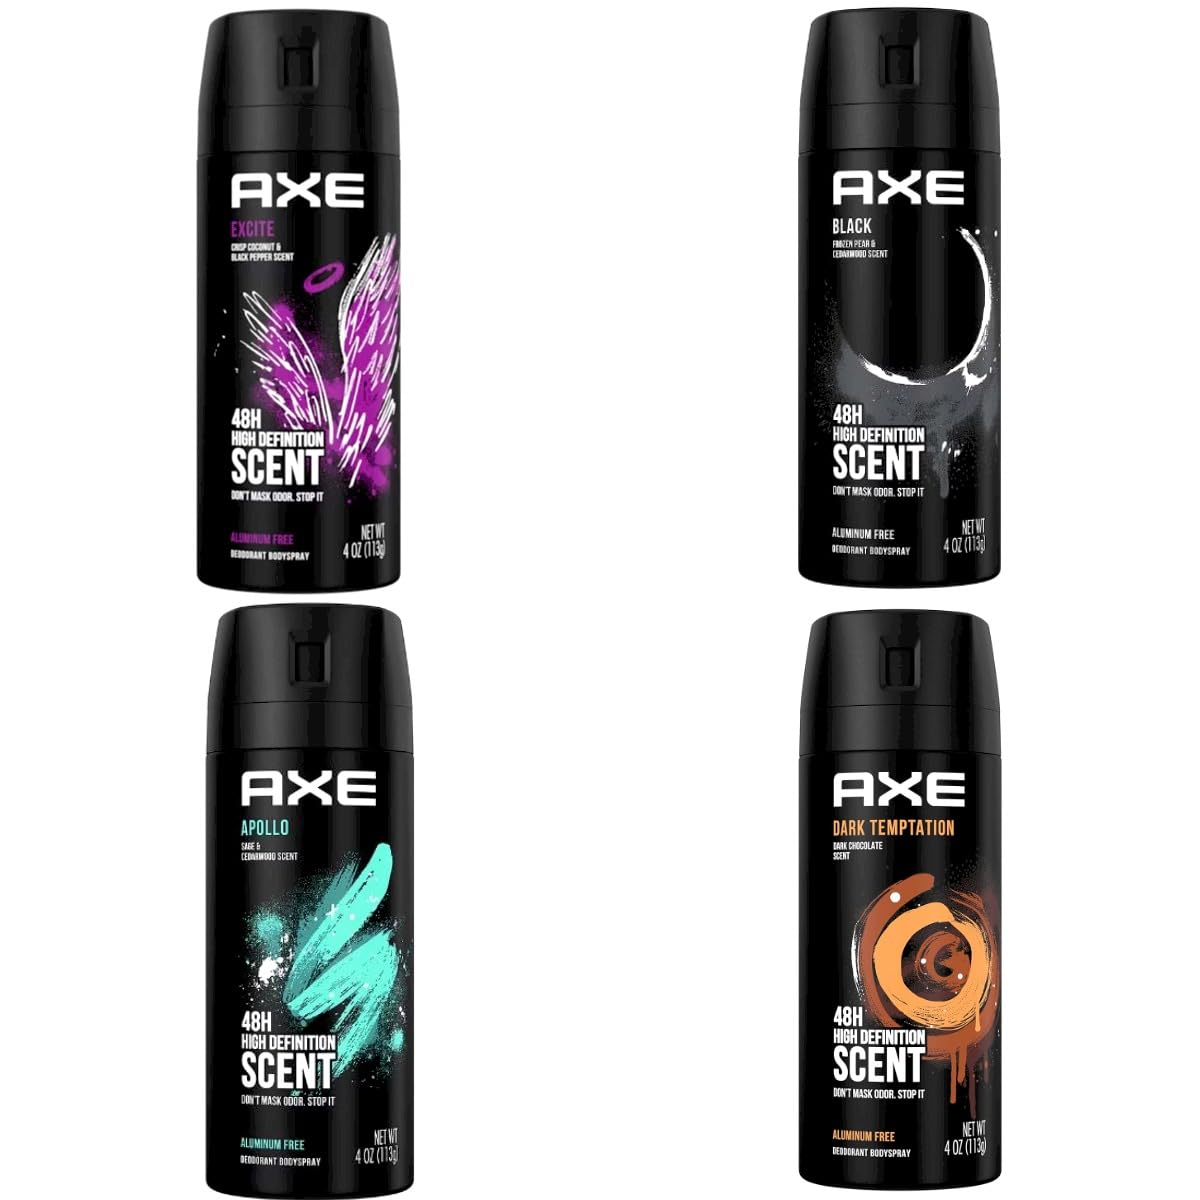 AXE Deodorant Bodyspray for Men, Apollo, Excite, Black, Dark Temptation 48 Hours Deodorant Body Spray AHSR Products Bundle Set, Gift Set Packing, Masculine Scent 150 ml (Pack of 4)